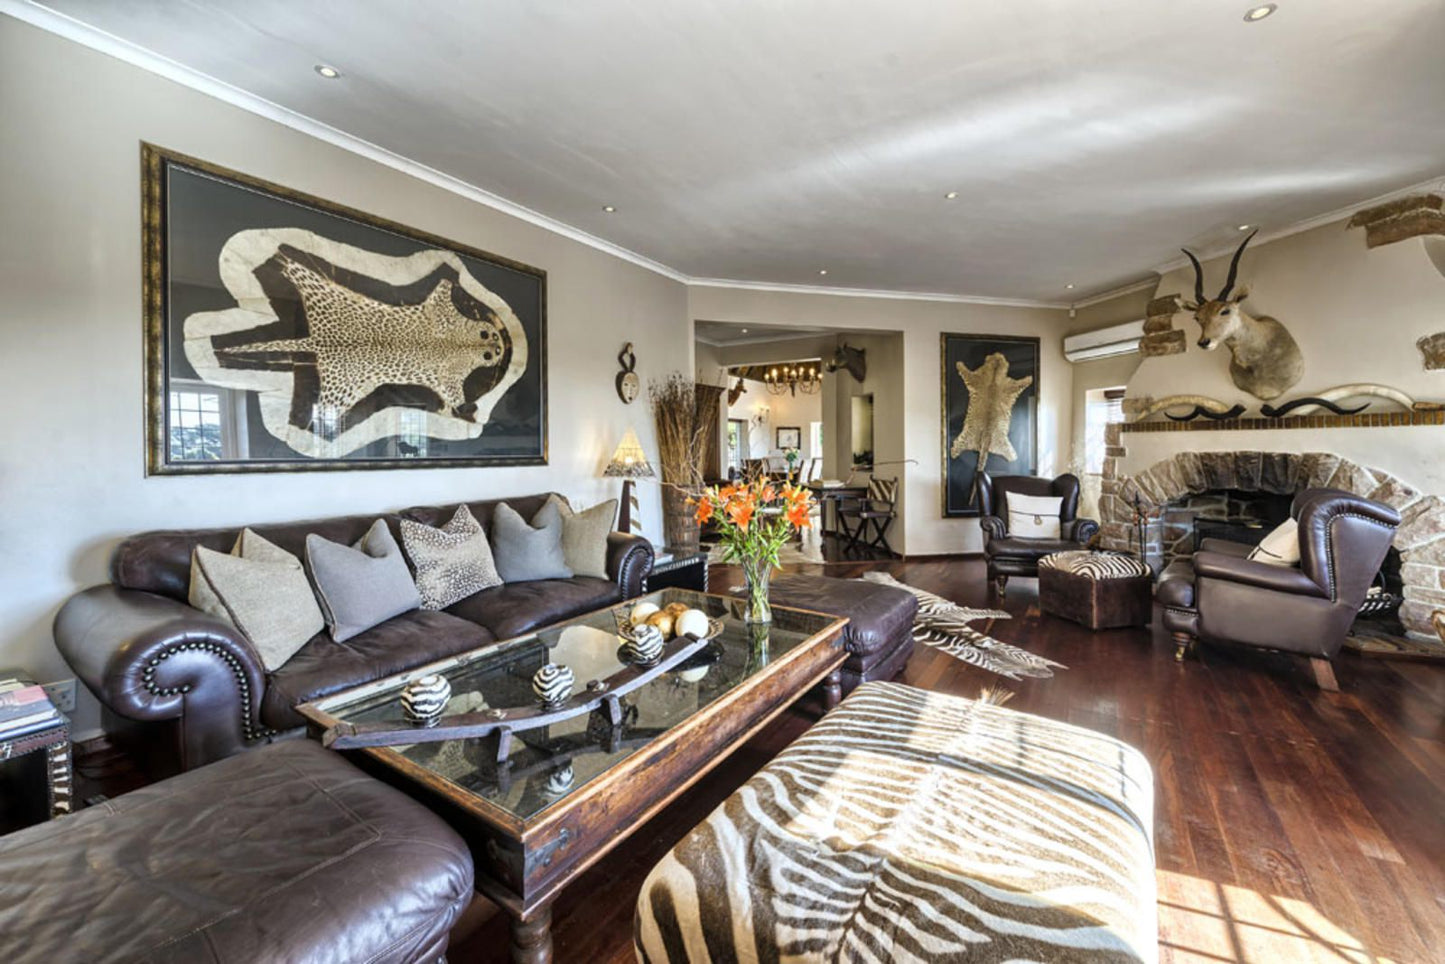 Ikhaya Safari Lodge Constantia Cape Town Western Cape South Africa House, Building, Architecture, Living Room